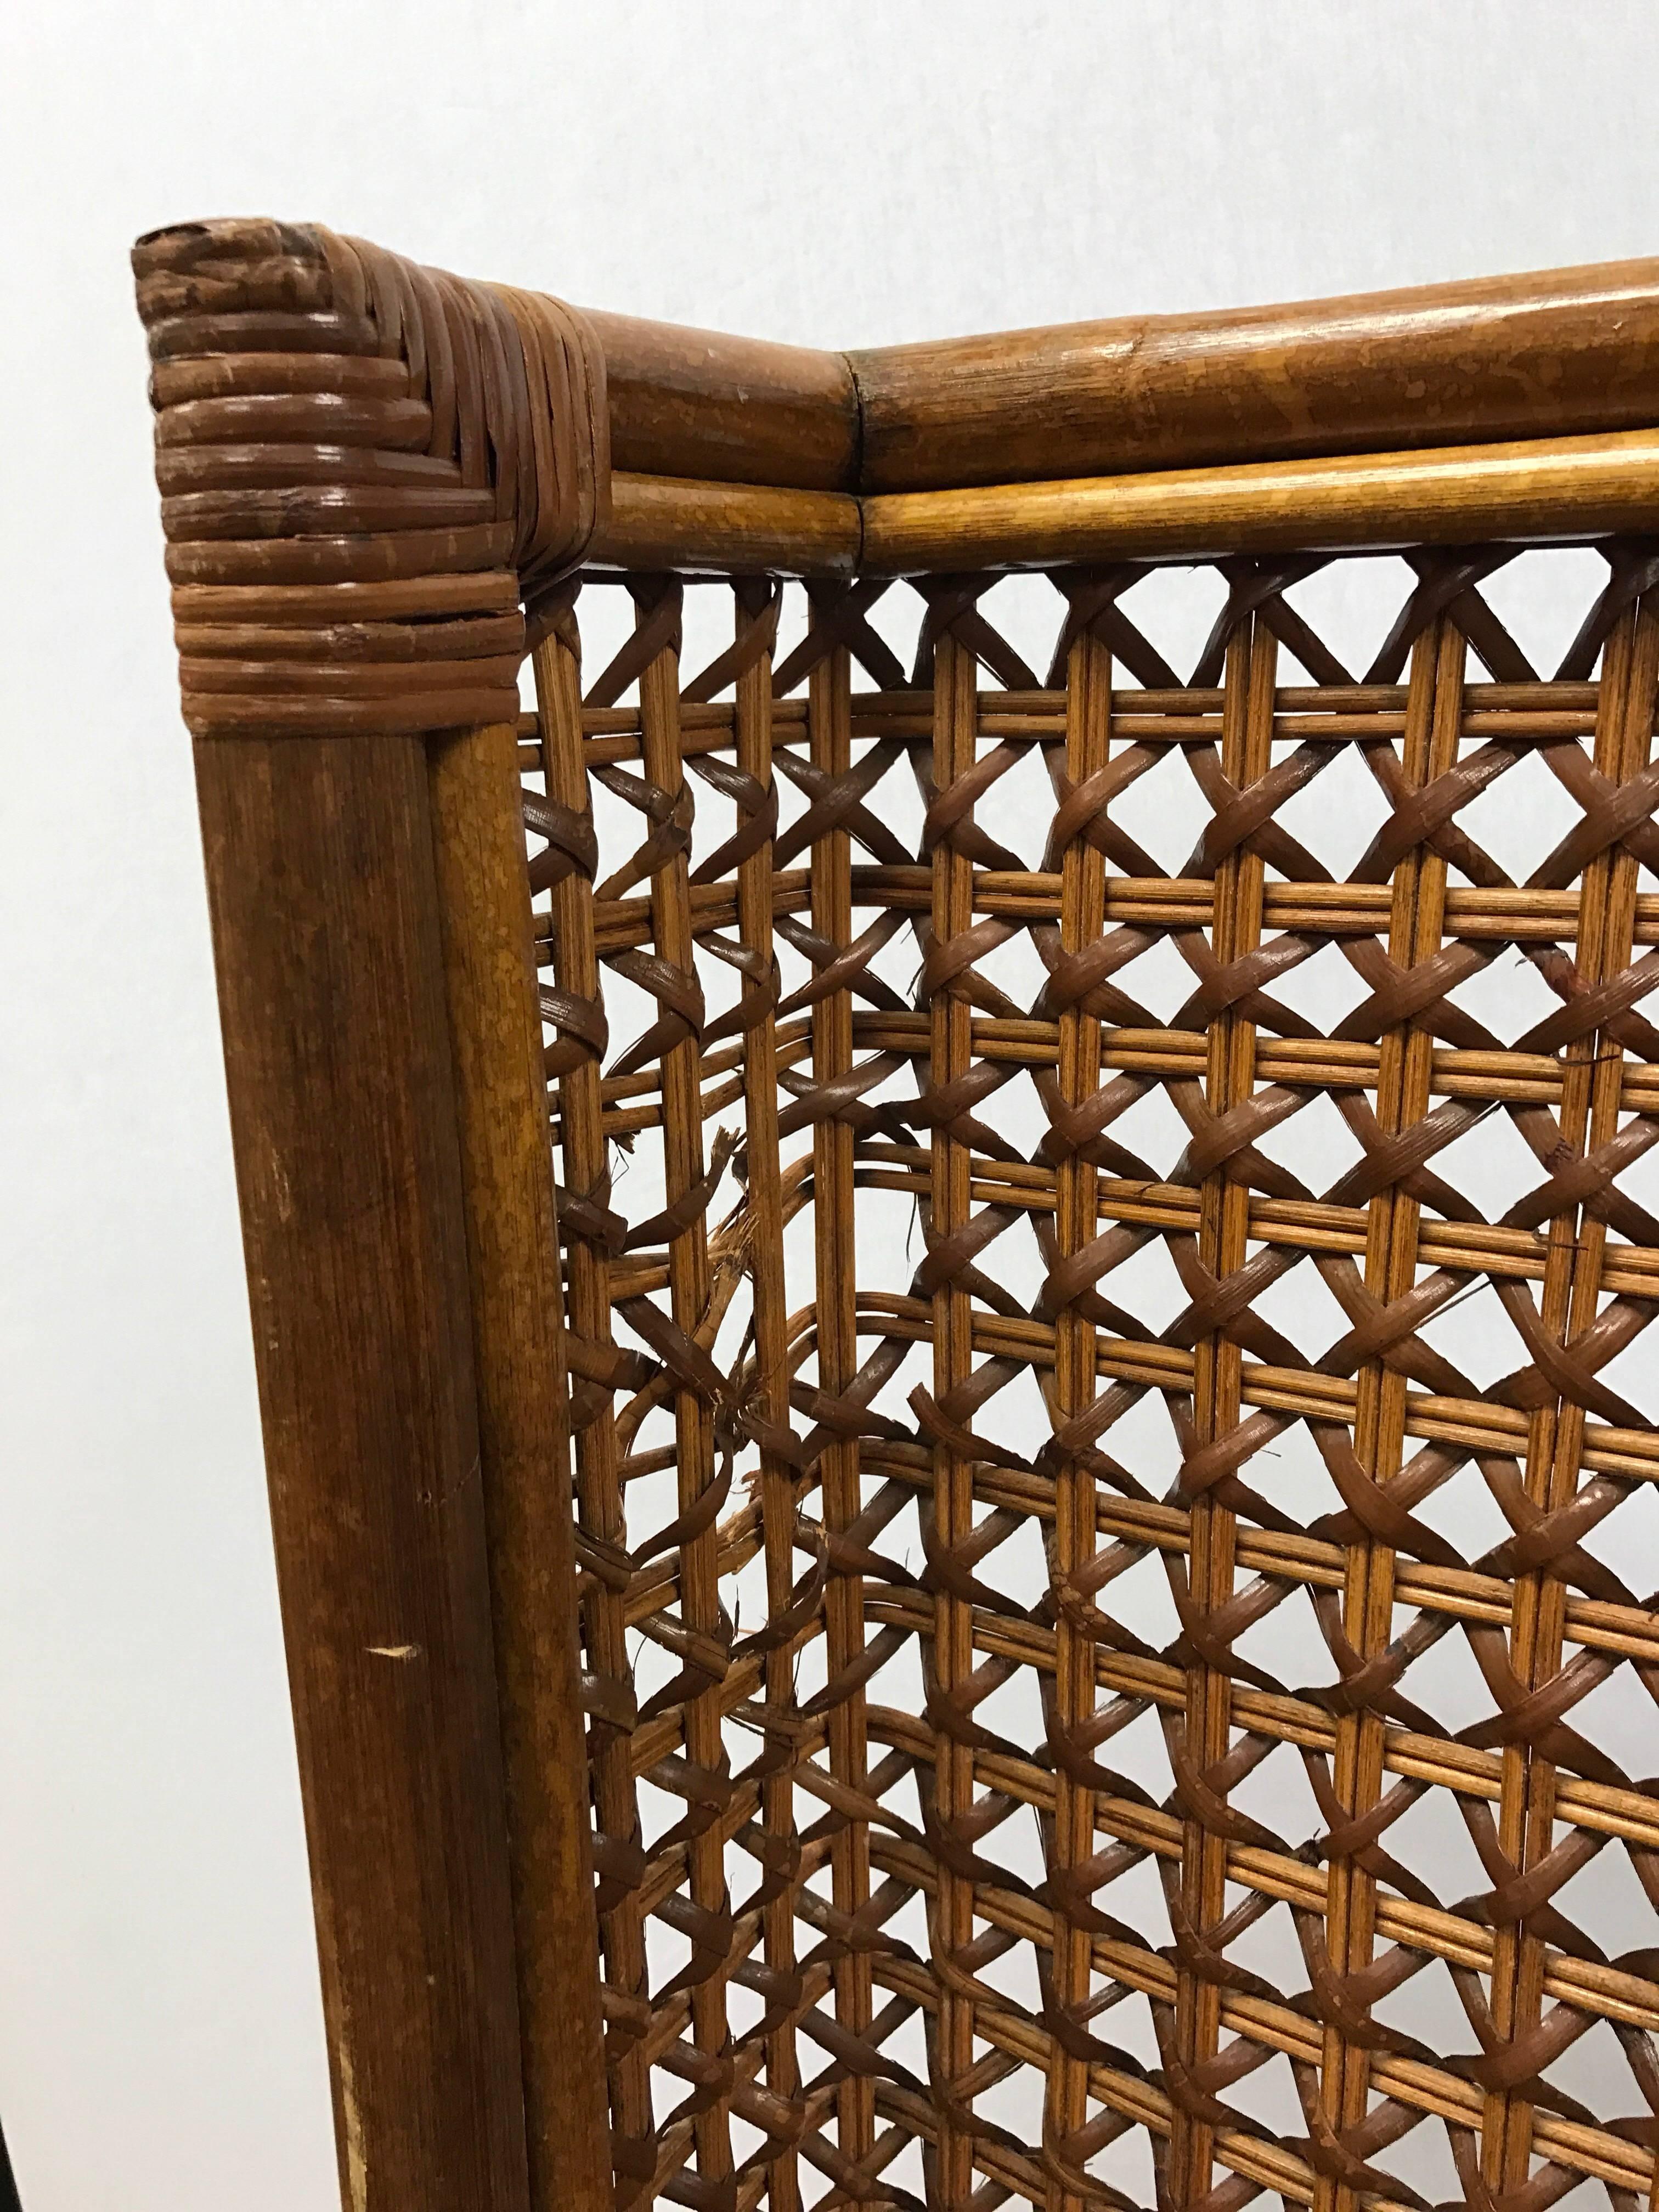 Very tall Danish midcentury wingback rattan chair with a woven back and woven wicker seat.